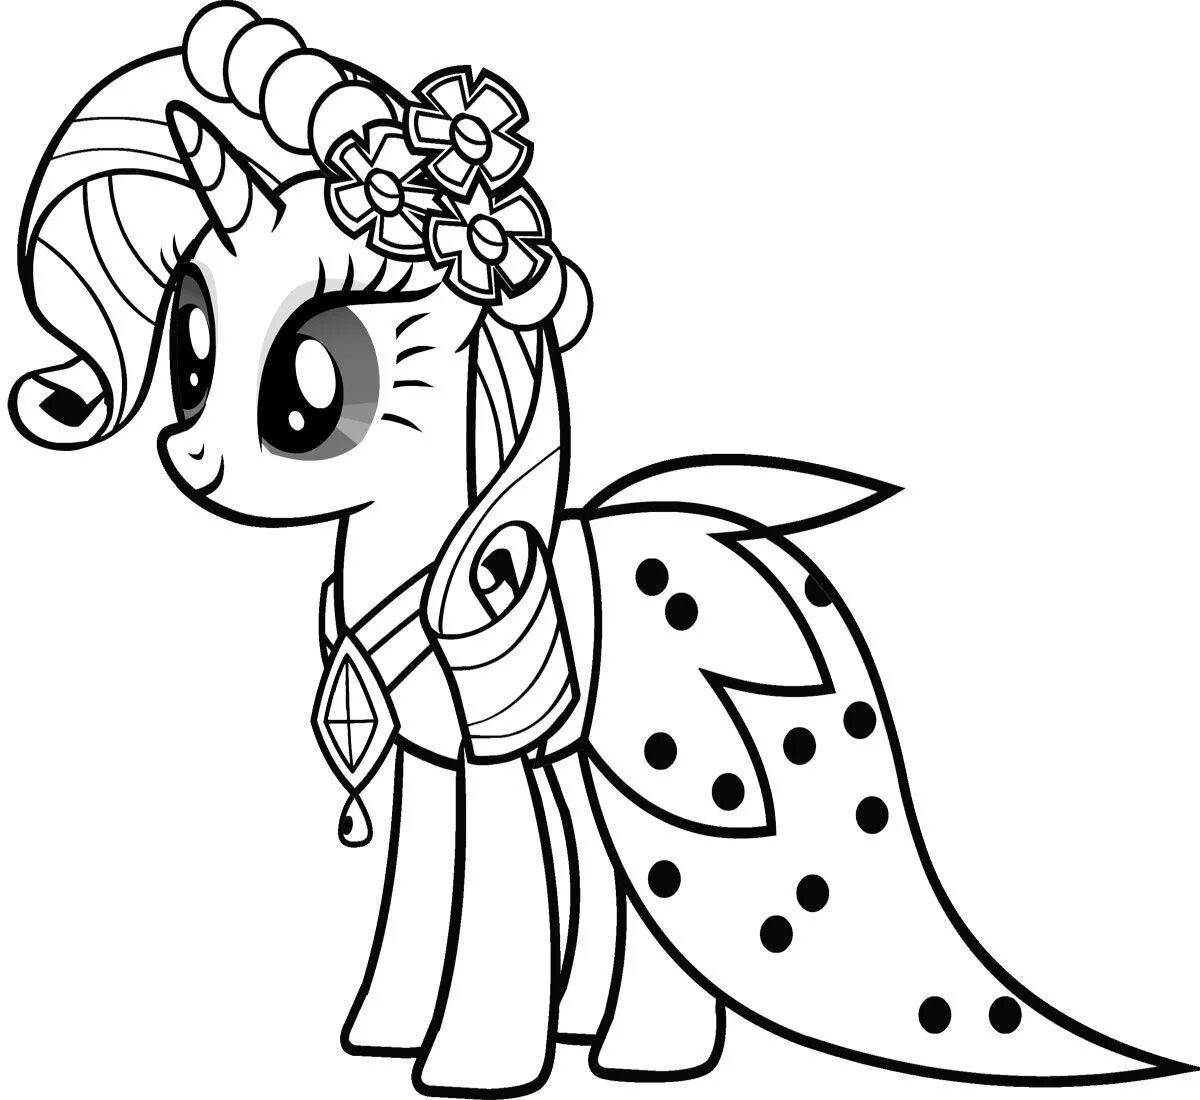 Mystical coloring for girls cute pony